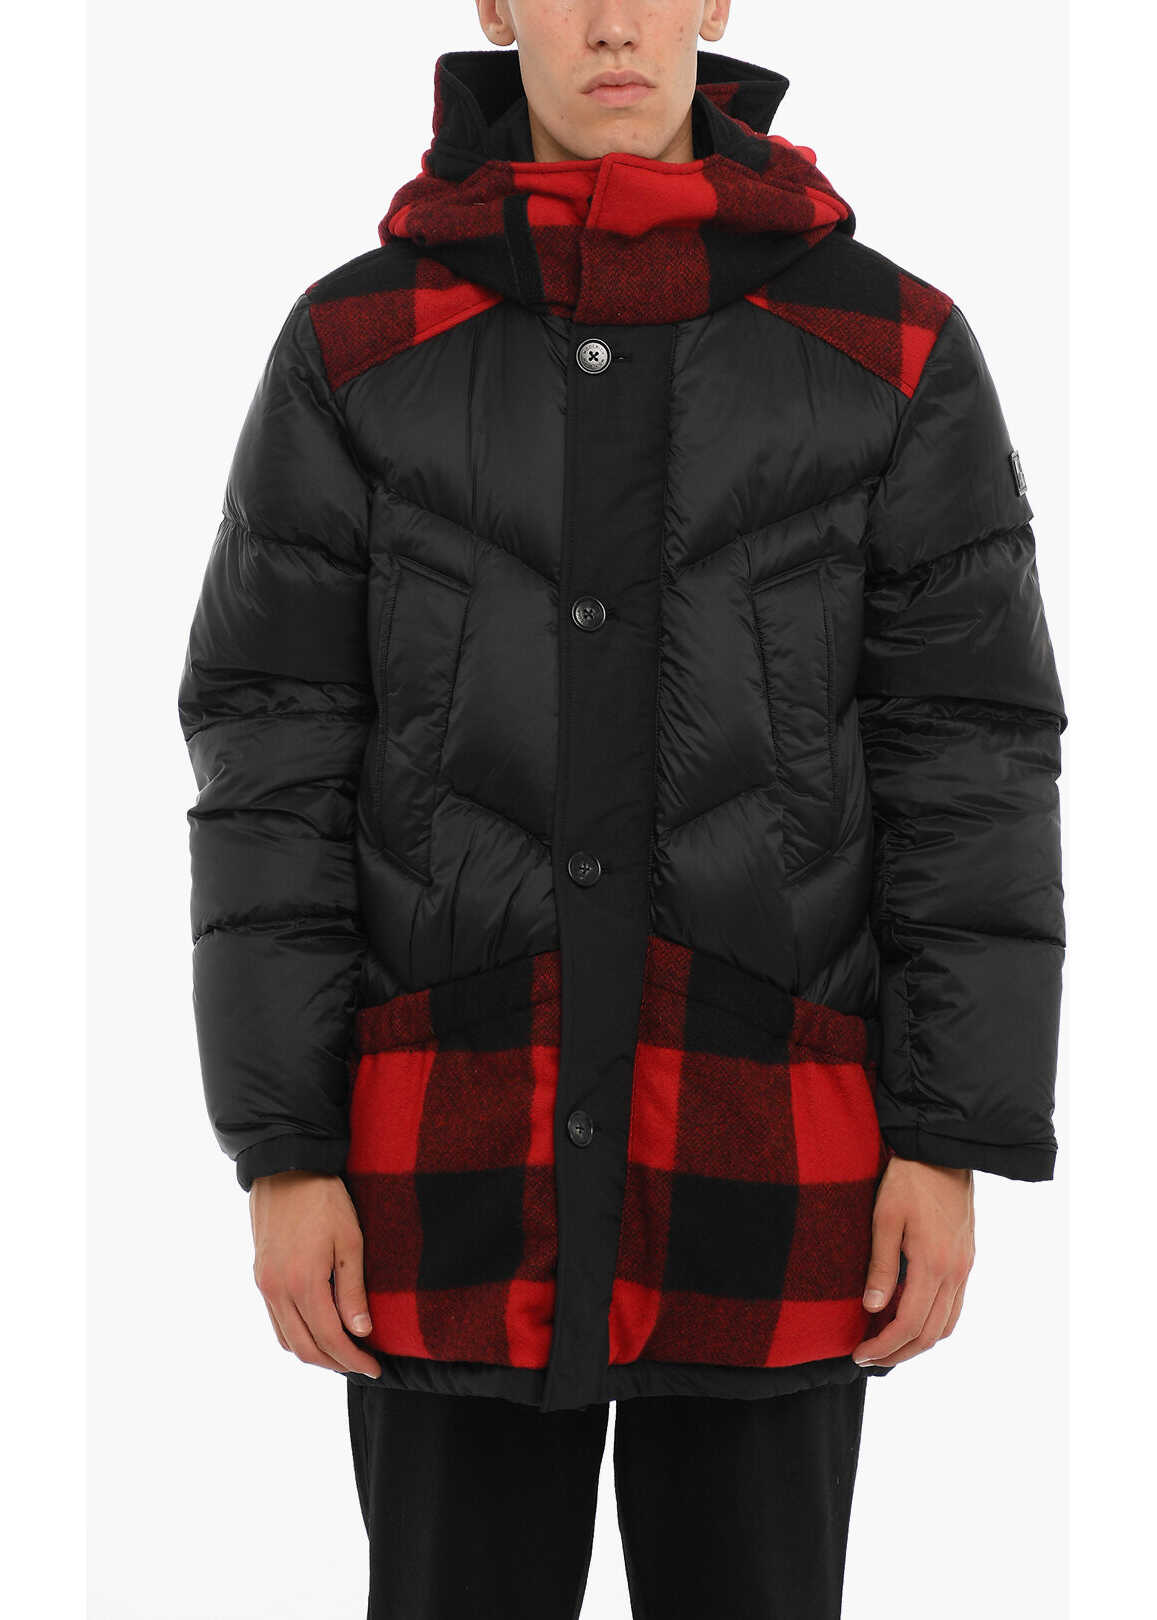 Woolrich Reversible Down Jacket With Wool Anche Buffalo Check Details Black